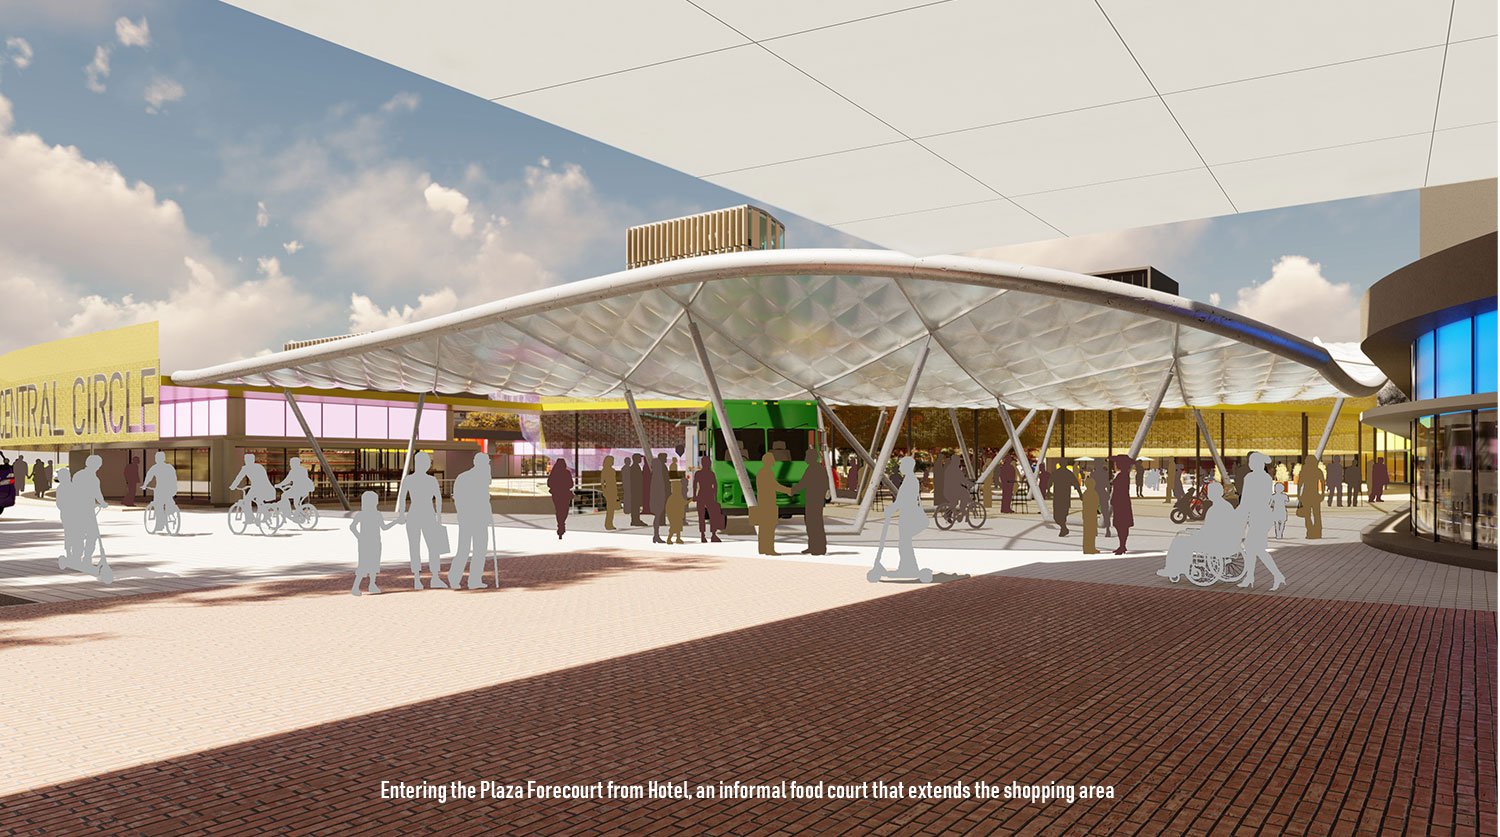 The Plaza Forecourt extends the shopping area to the hotel entry. | University of Arkansas Community Design Center